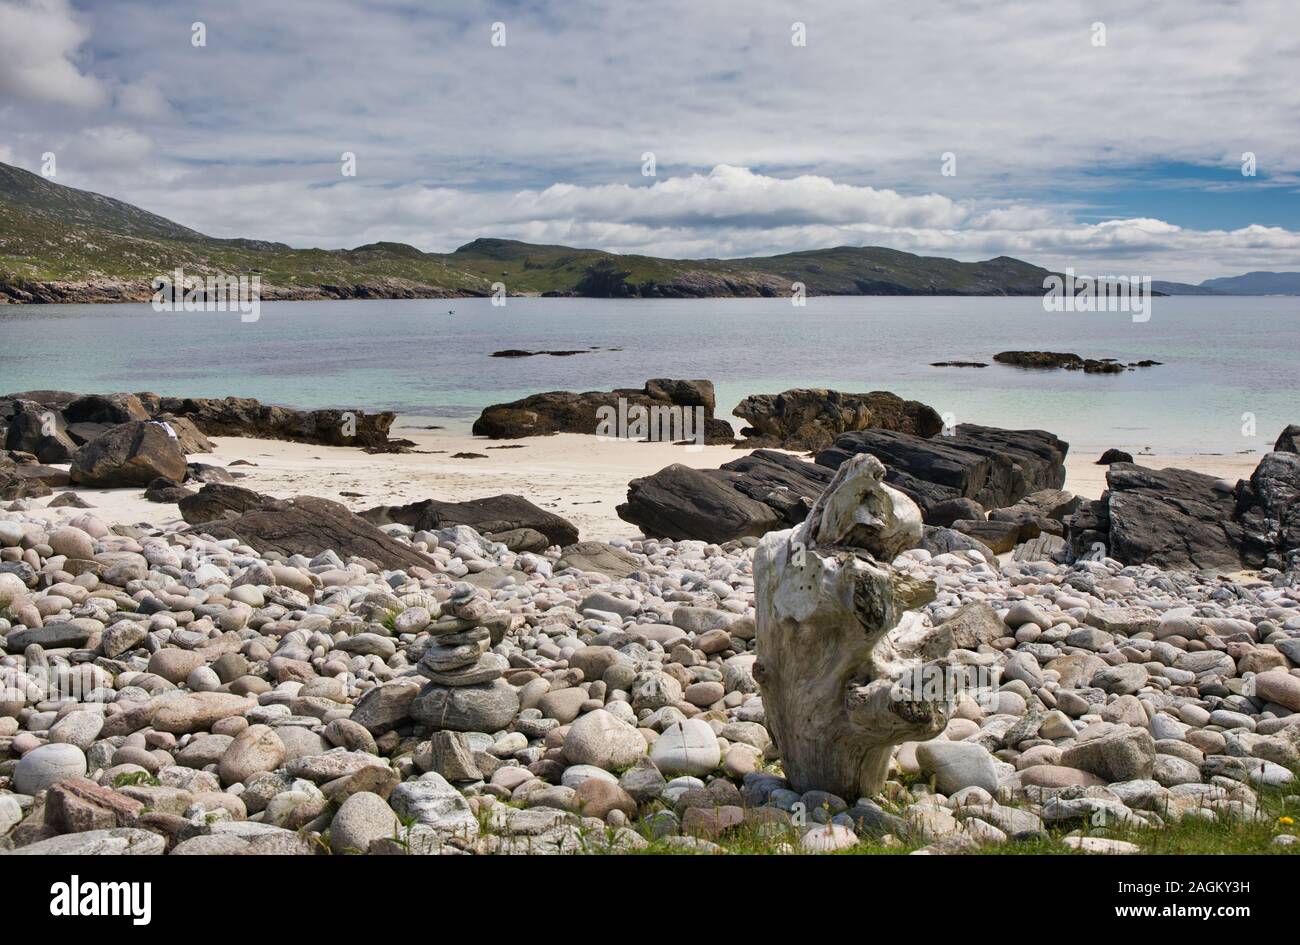 Atlantic ocean at remote Hushinish on the west coast of the Isle of Harris, Outer Hebrides, Scotland Stock Photo